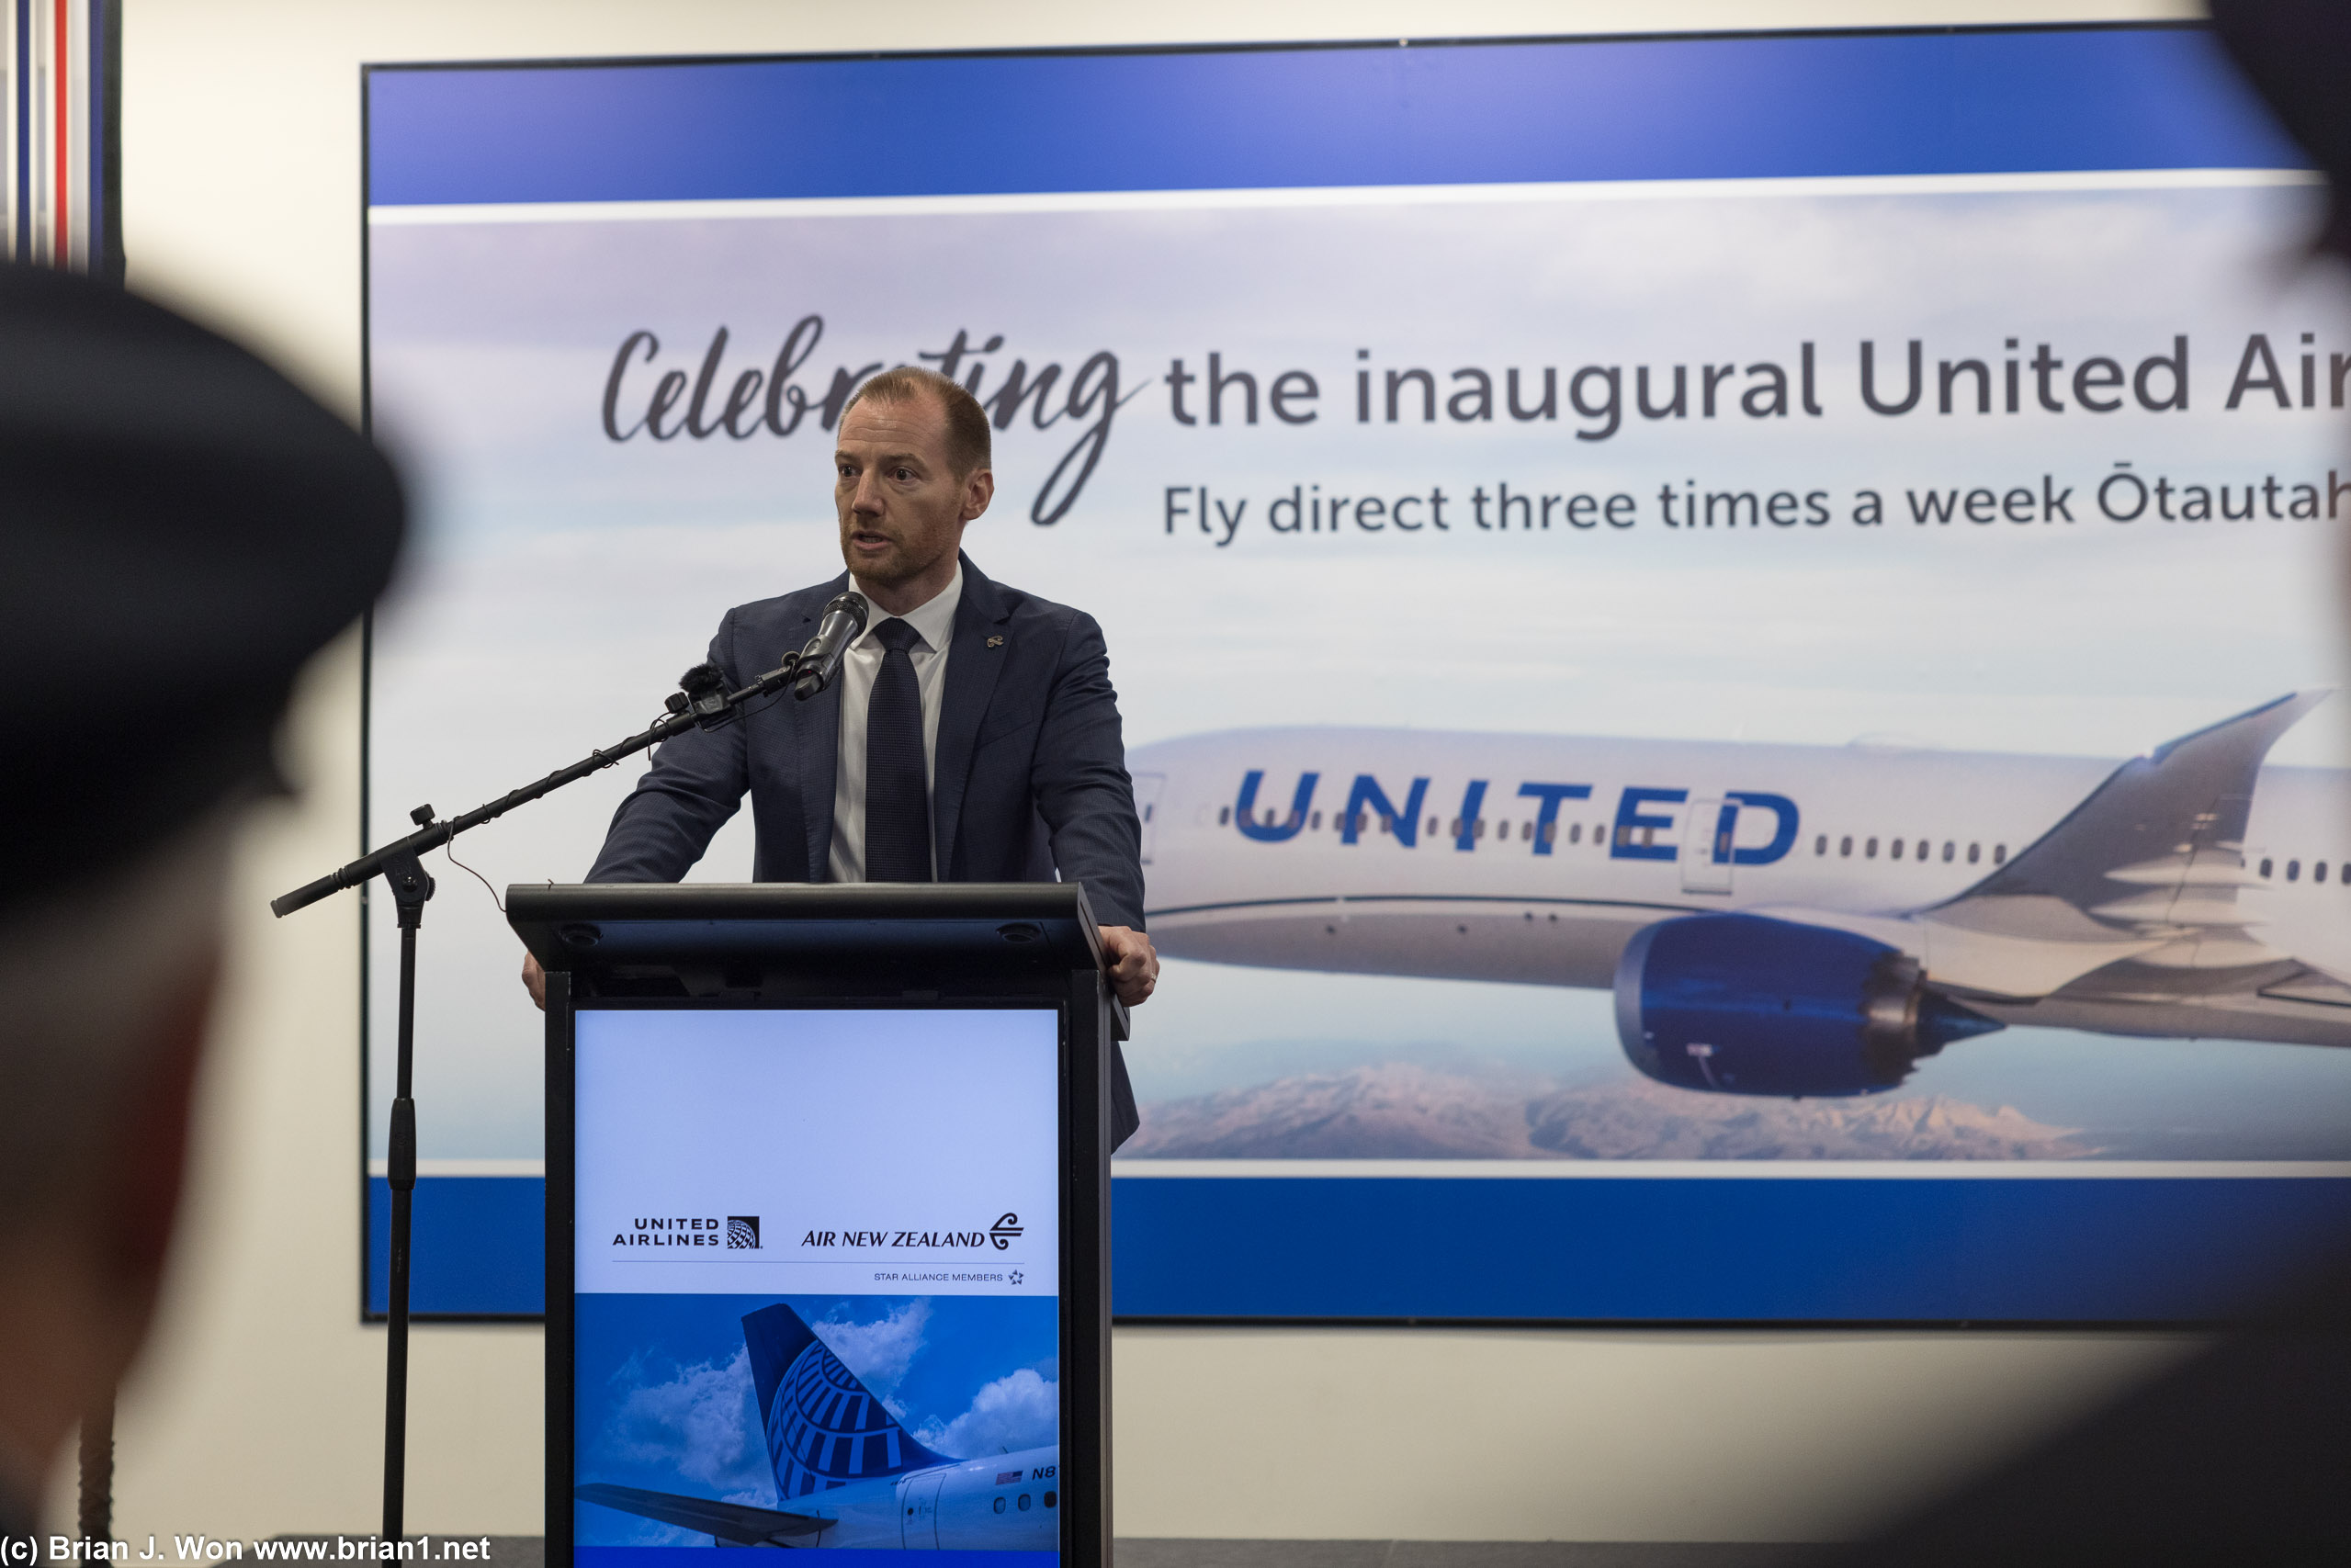 Tim Swan, General Manager Global Sales, Air New Zealand.